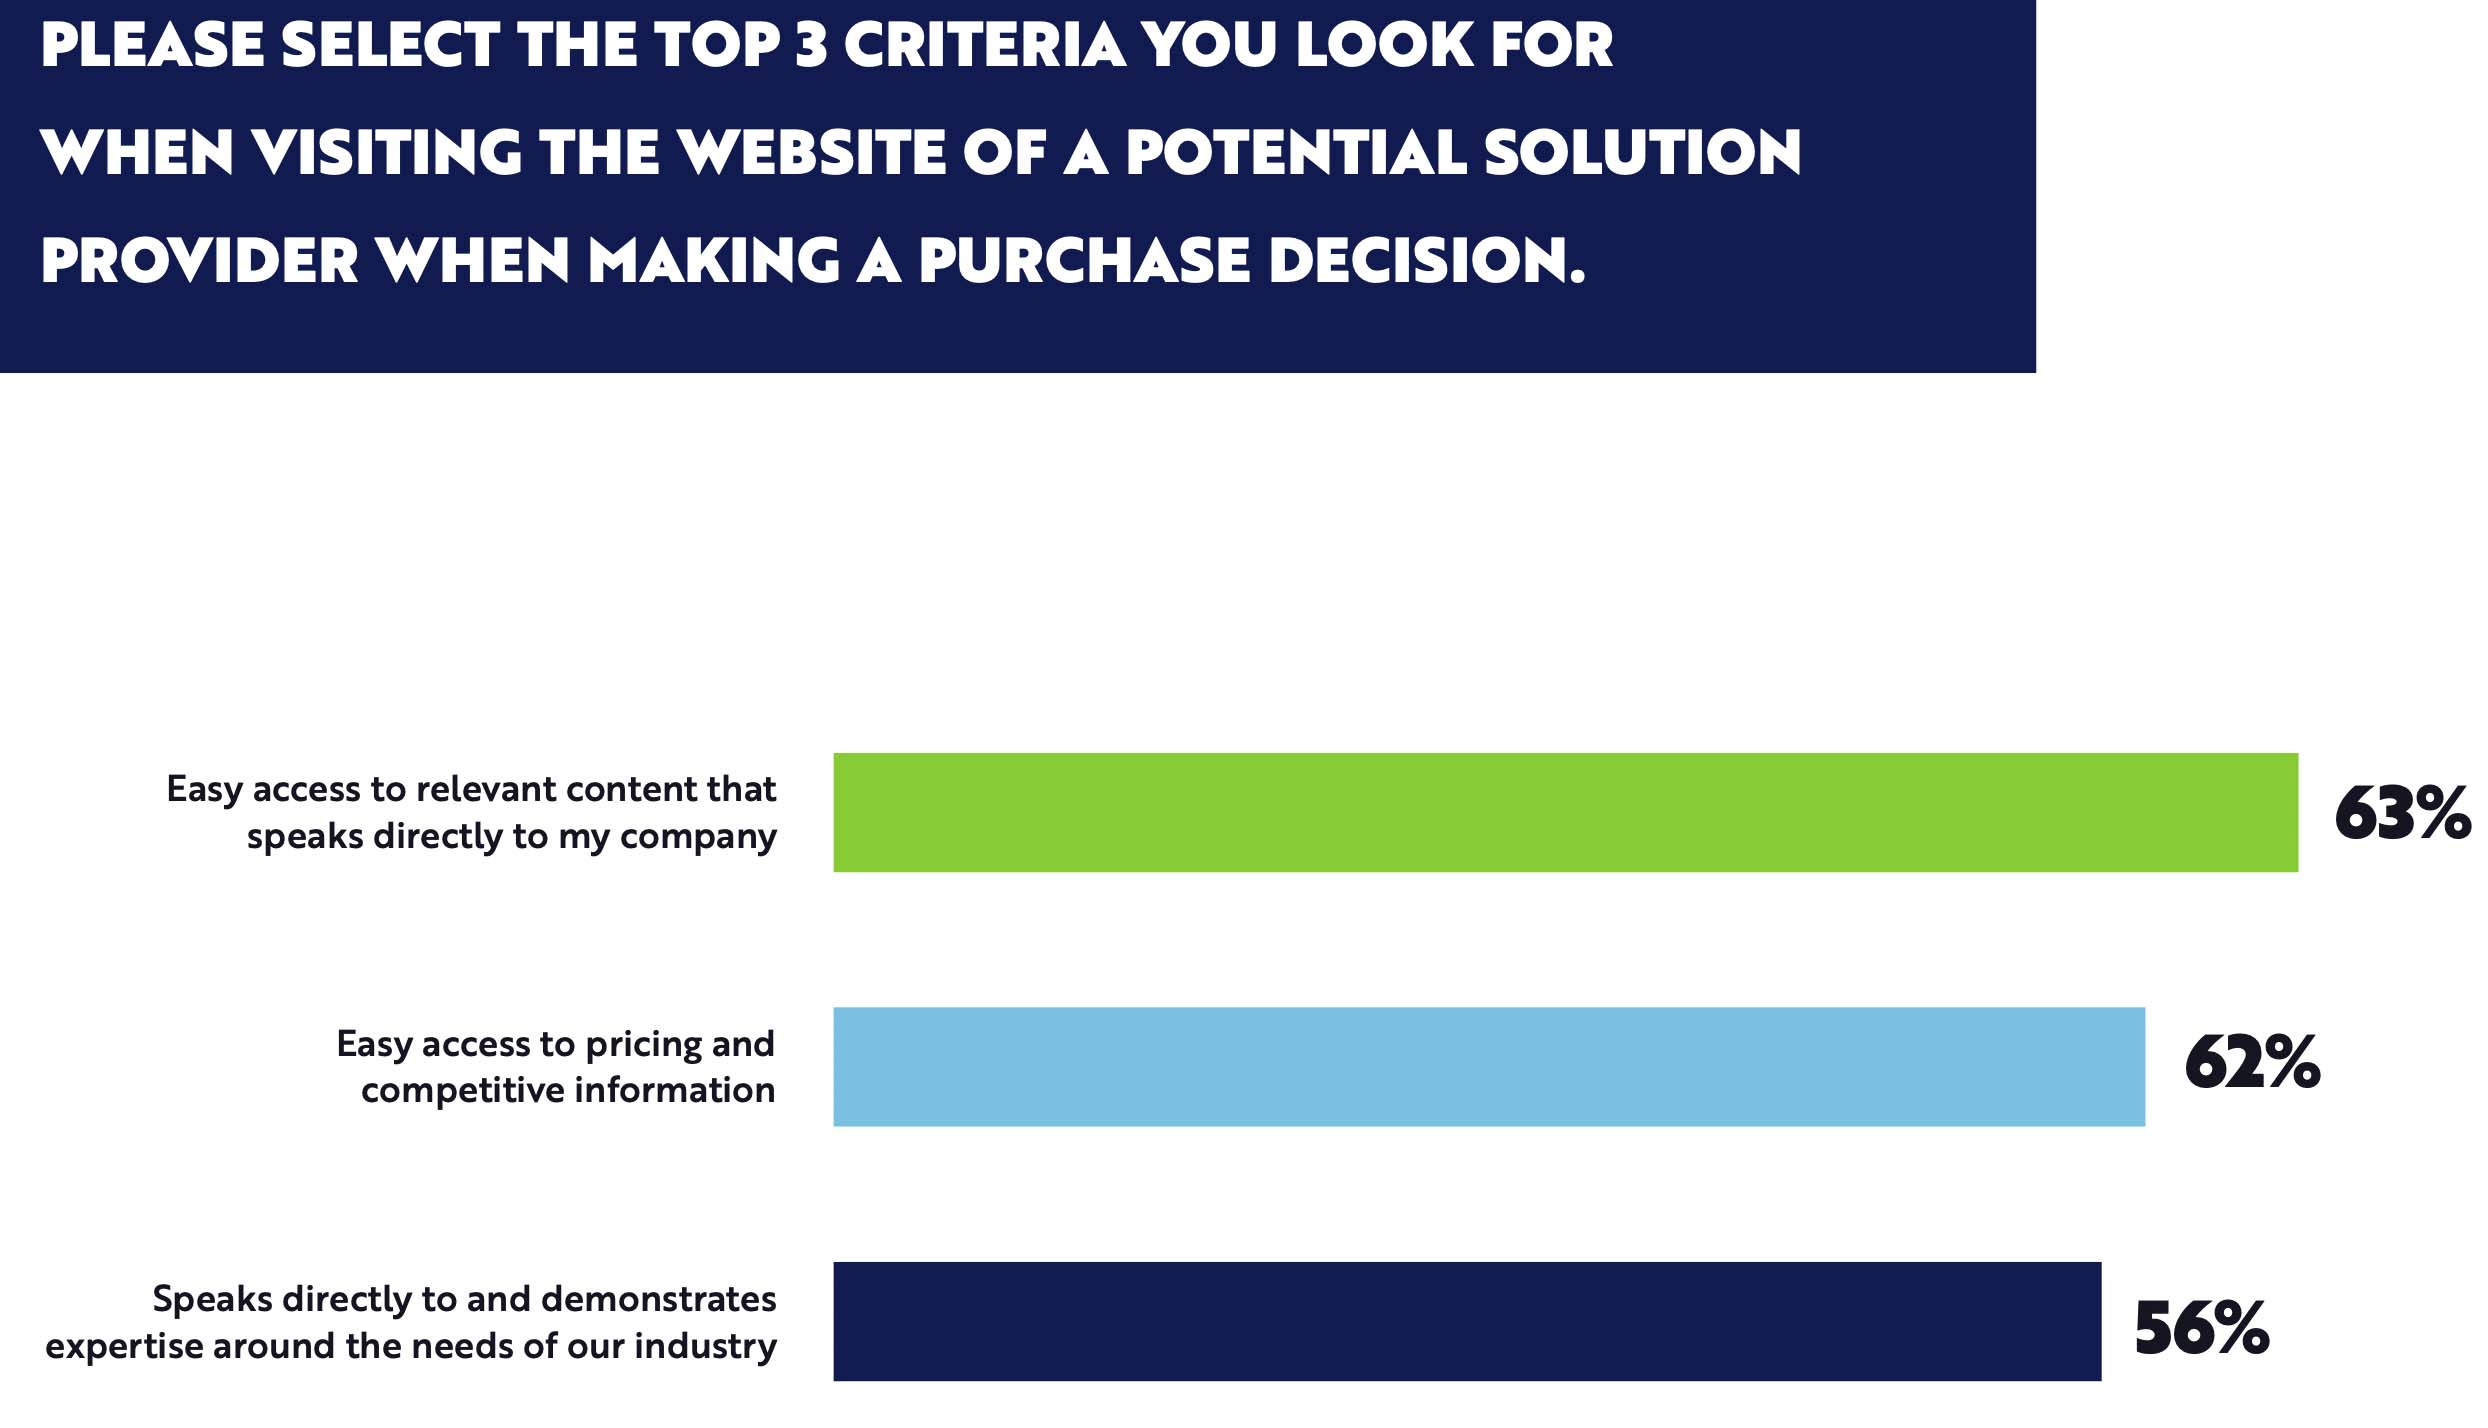 statistics on the top 3 criteria to look for when choosing a service from a website